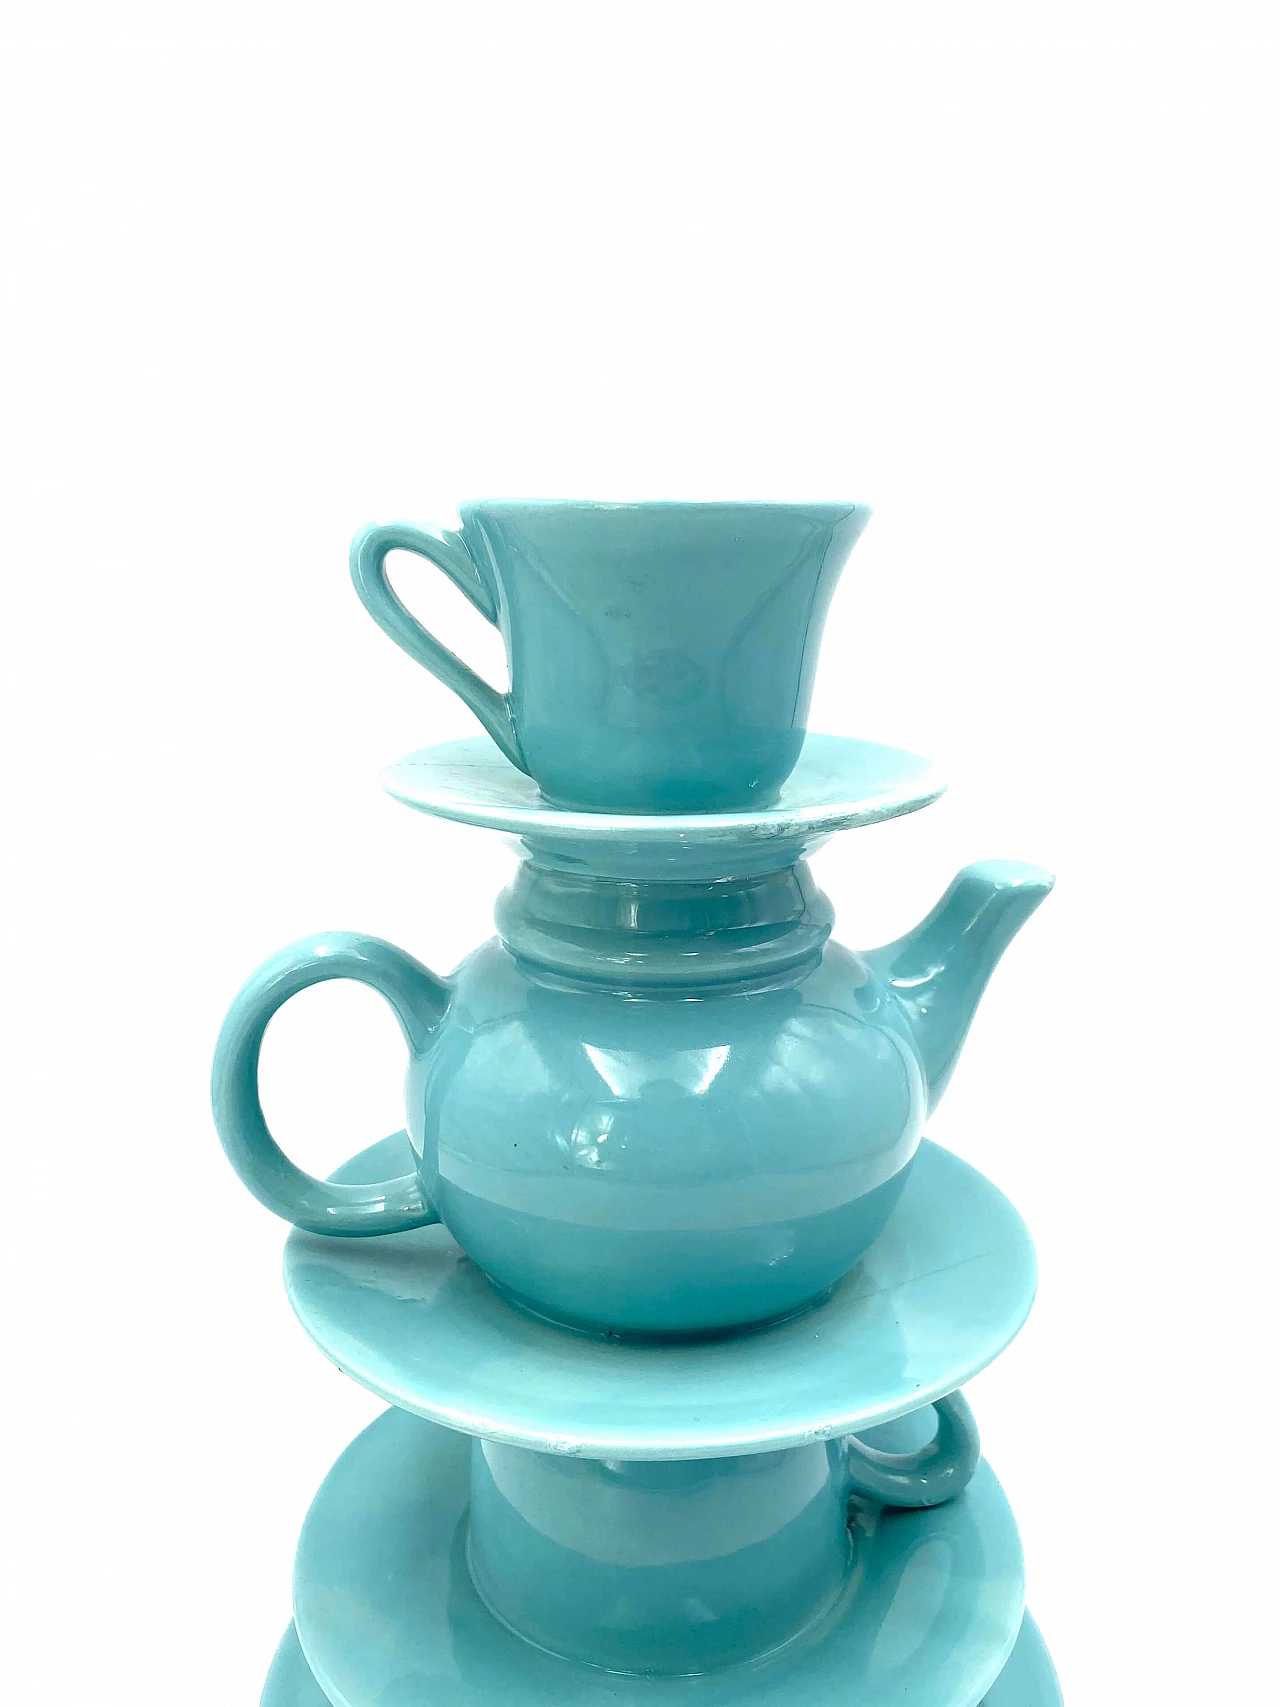 Vase in the shape of stacked blue teacups, 80s 1251798